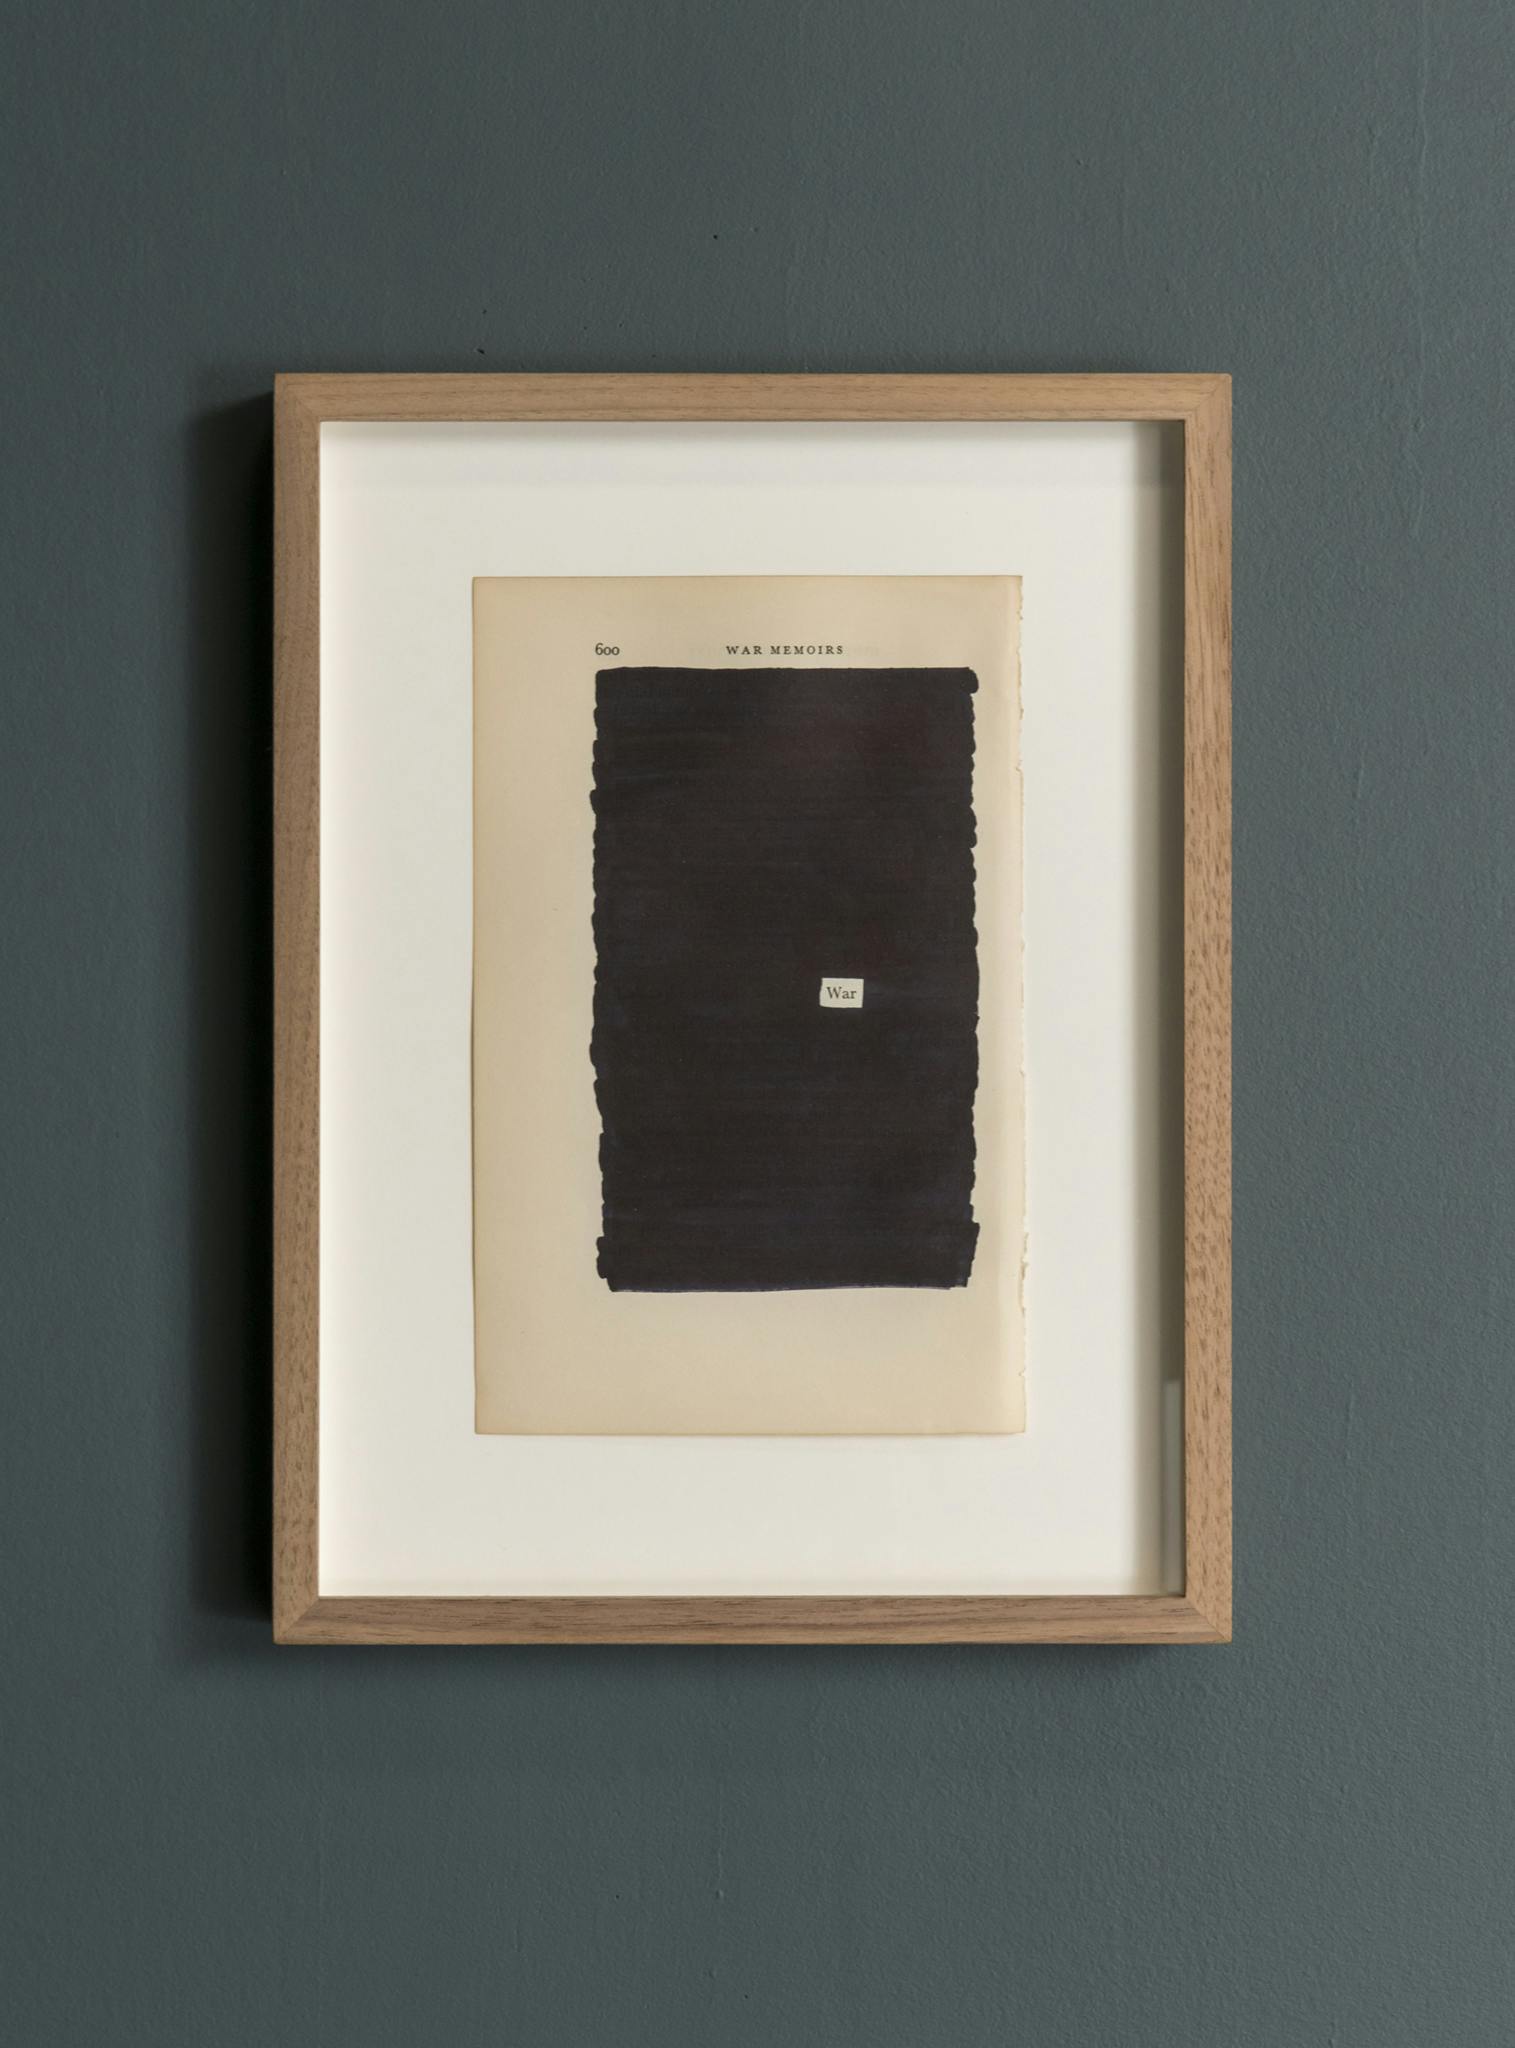 A wooden frame hangs on a blue-grey wall. Mounted in the frame is a page from a book. The title of the page reads “WAR MEMORIES.” The rest of the page is redacted, excluding one word, “war.” 